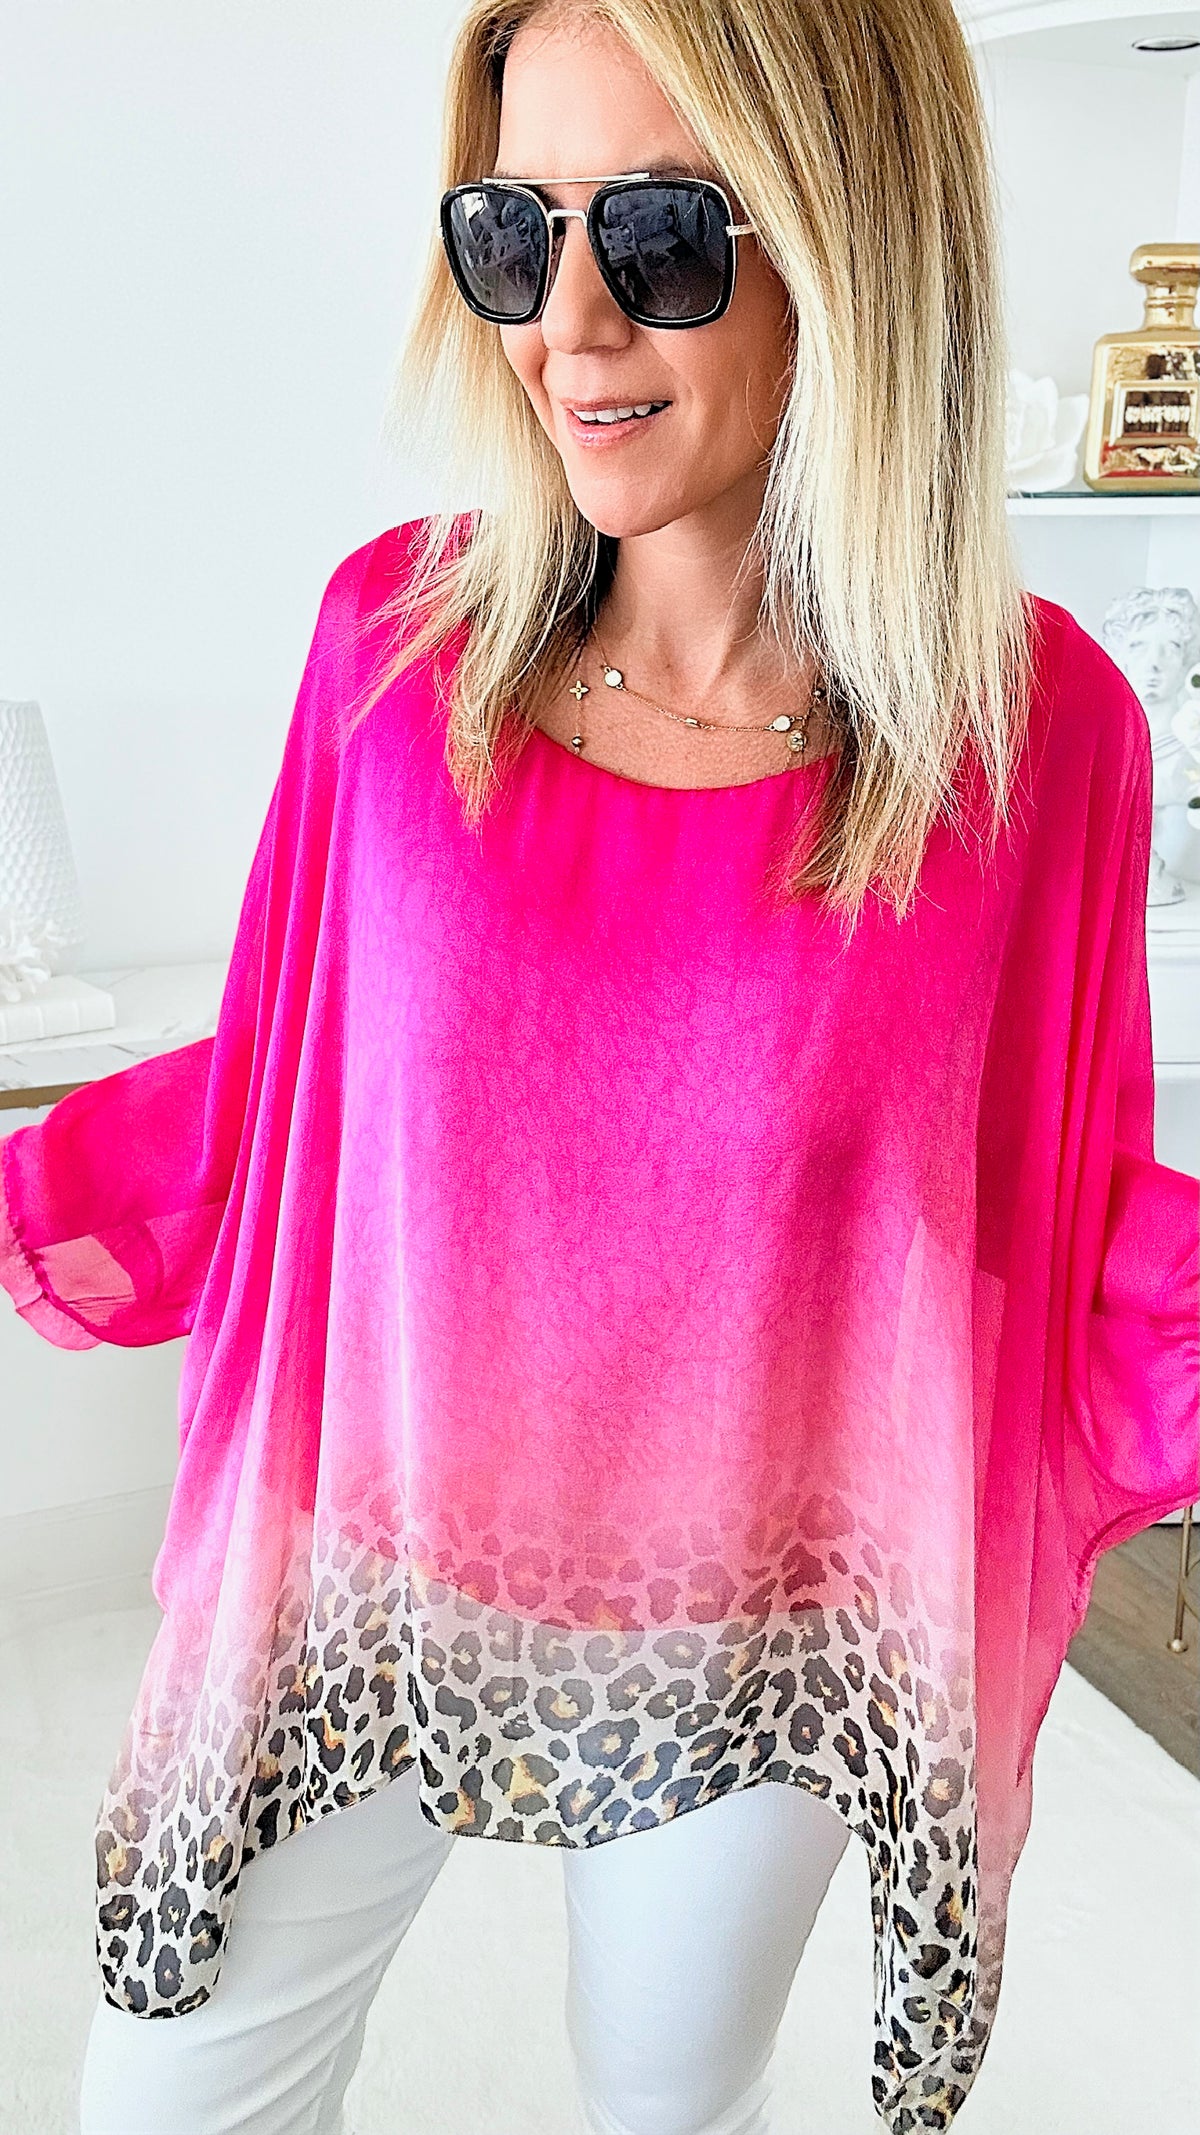 Wild Flowy Italian Top - Fuchsia-110 Short Sleeve Tops-Yolly-Coastal Bloom Boutique, find the trendiest versions of the popular styles and looks Located in Indialantic, FL